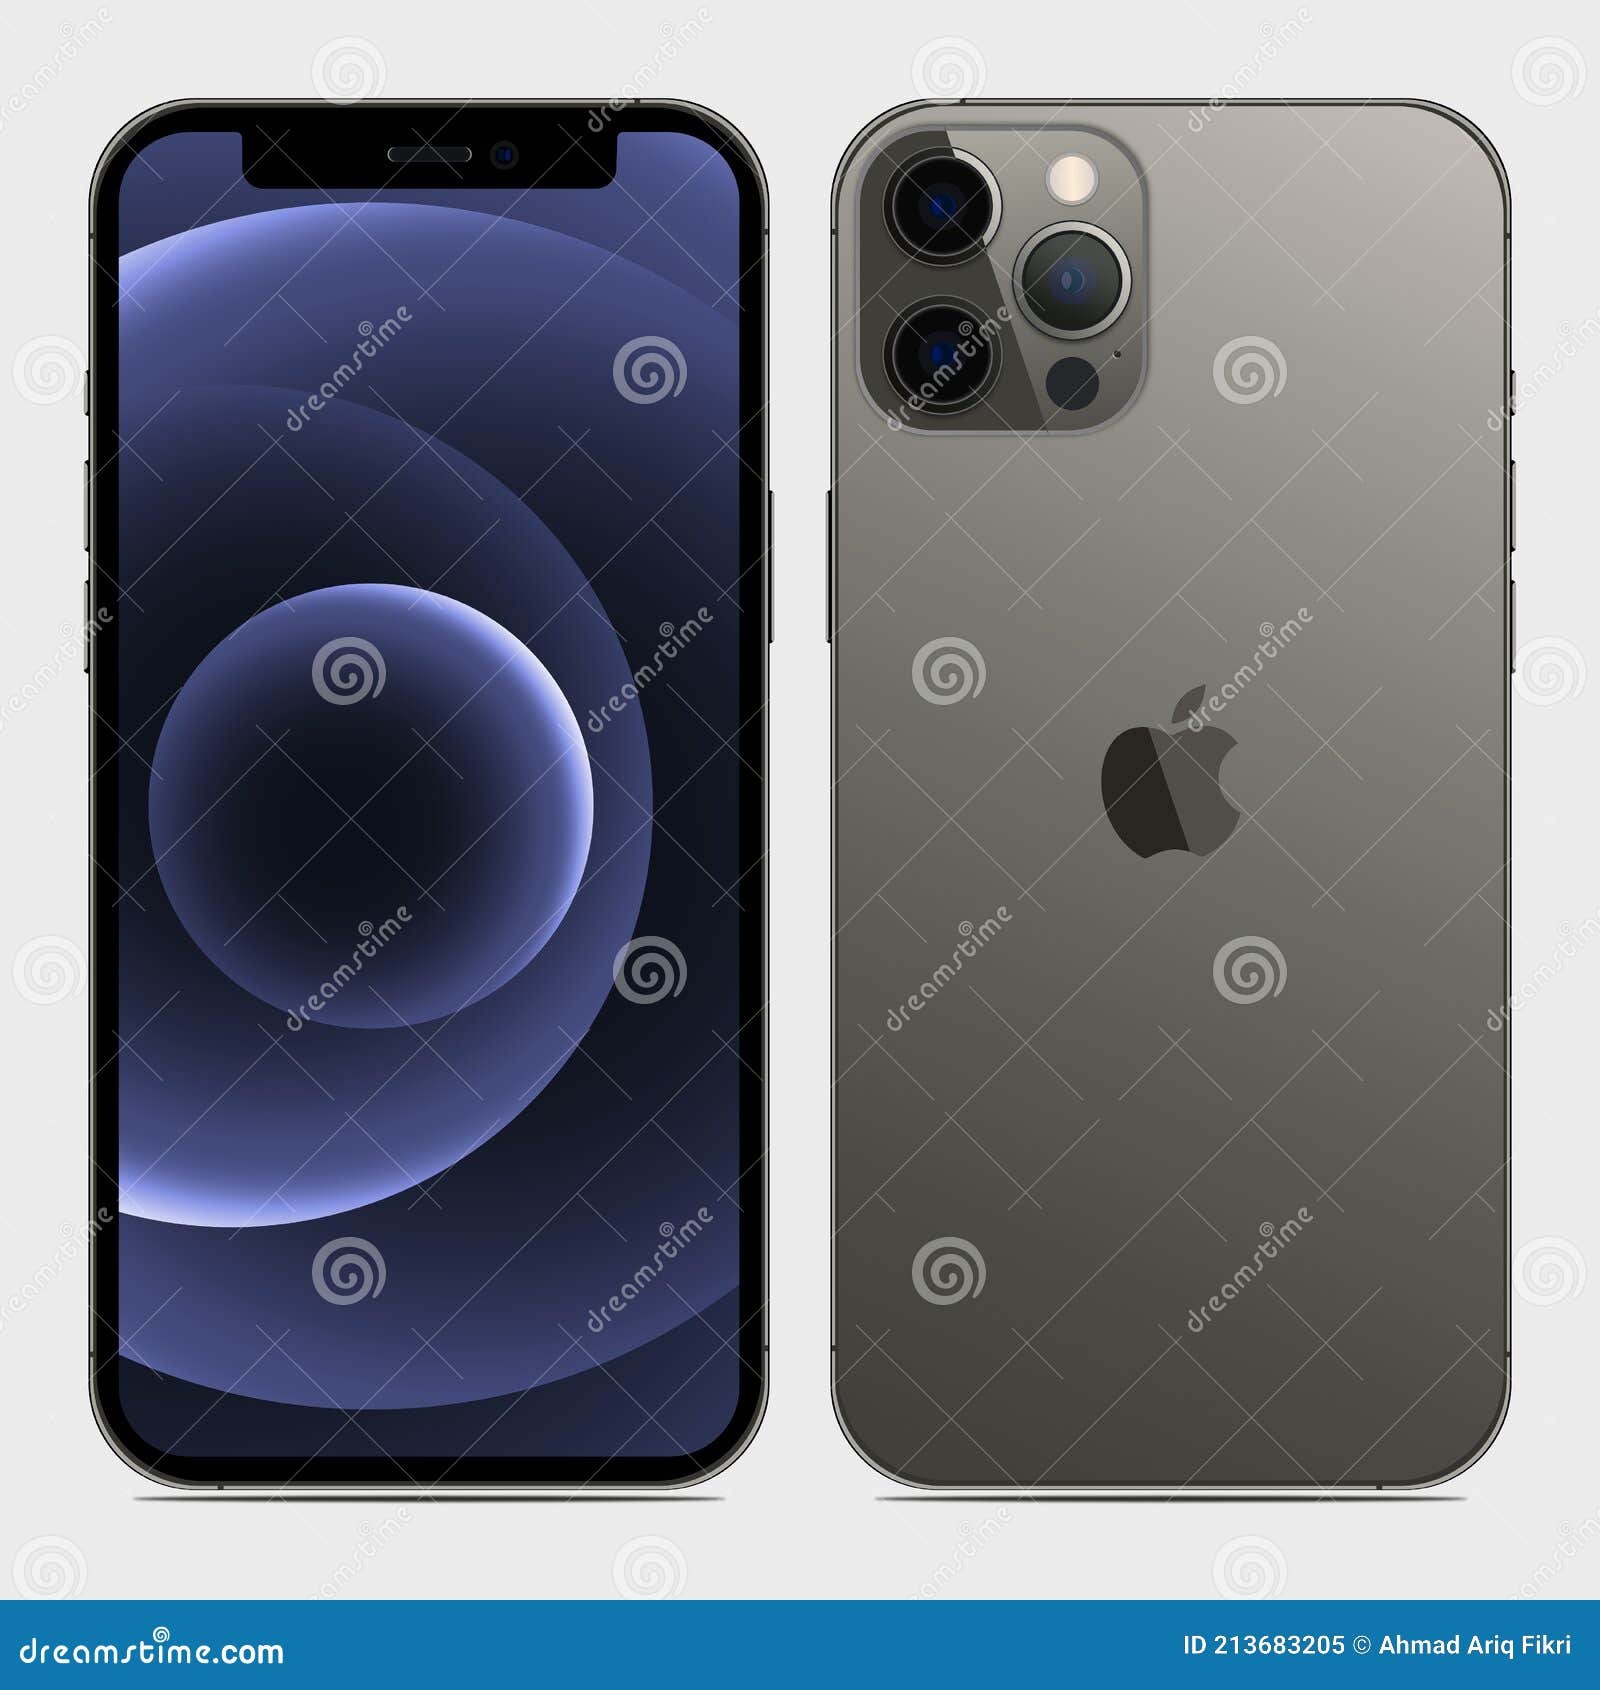 New Iphone 12 Pro Or Pro Max Graphite Color By Apple Inc Screen Iphone And Back Side Iphone Editorial Image Illustration Of Digital Frame